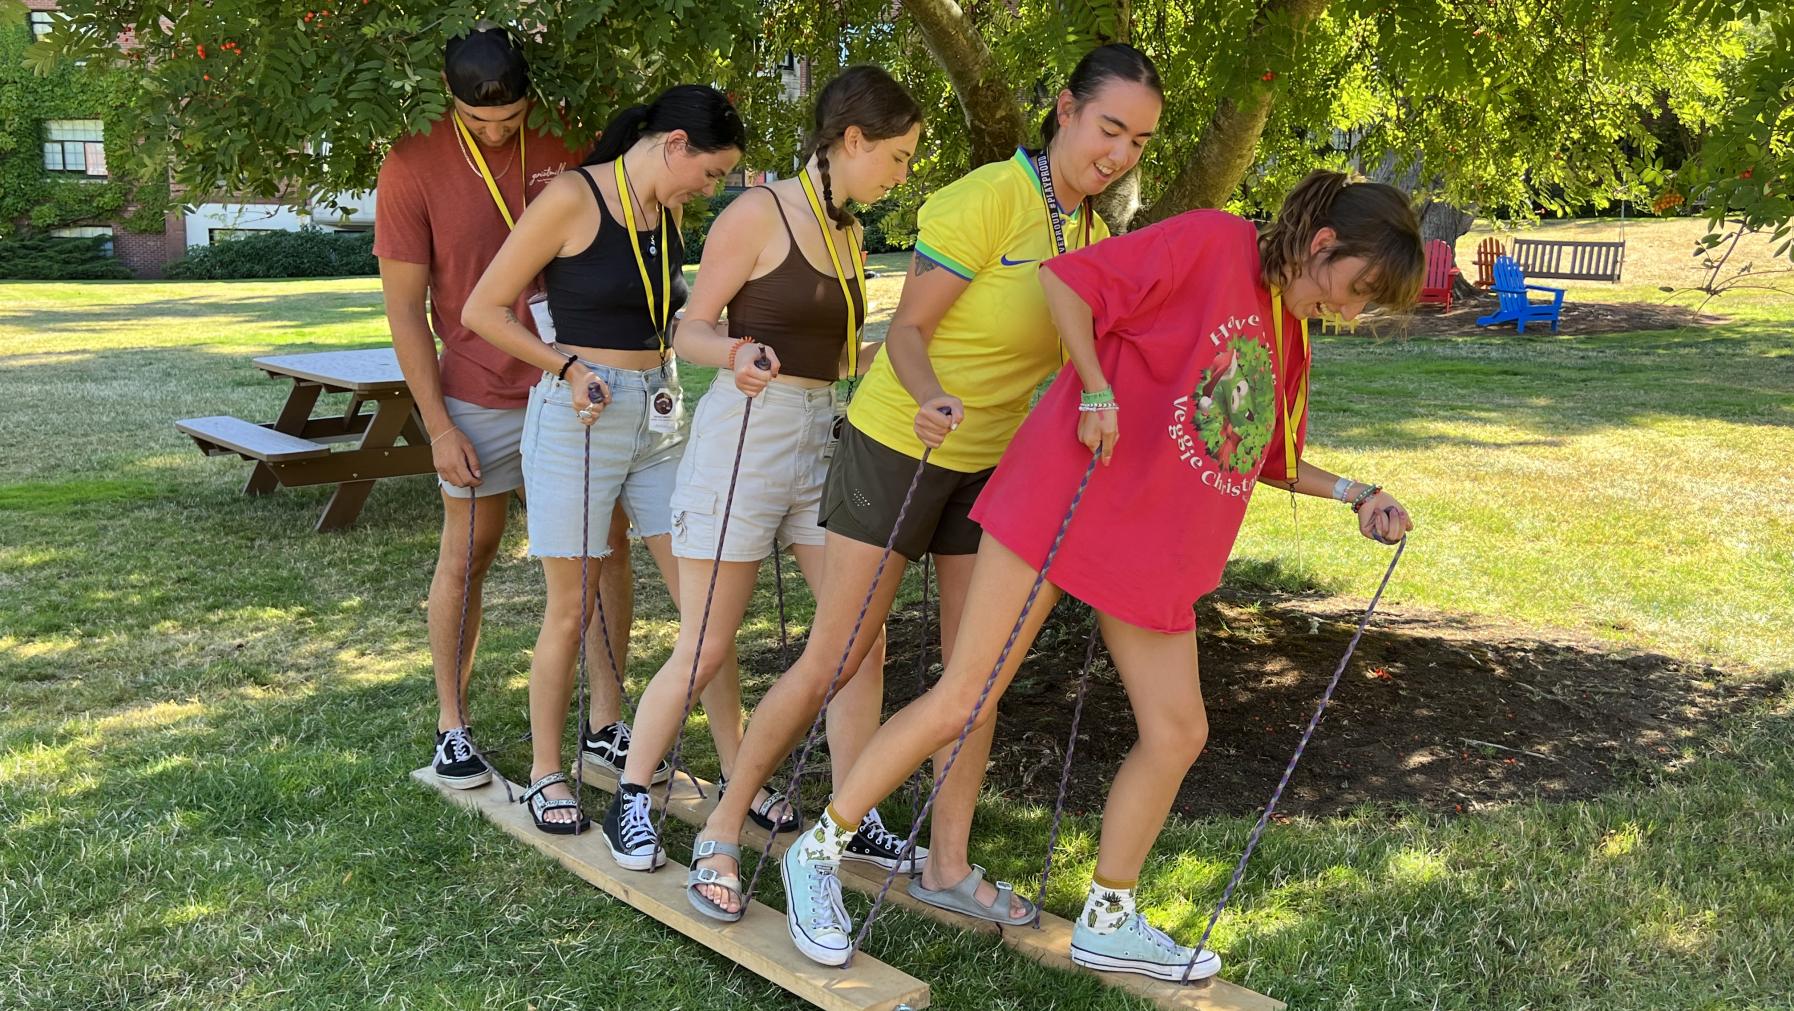 Students stand with either foot on long pieces of wood and hold ropes that attach to the wood planks trying to walk together across a field.